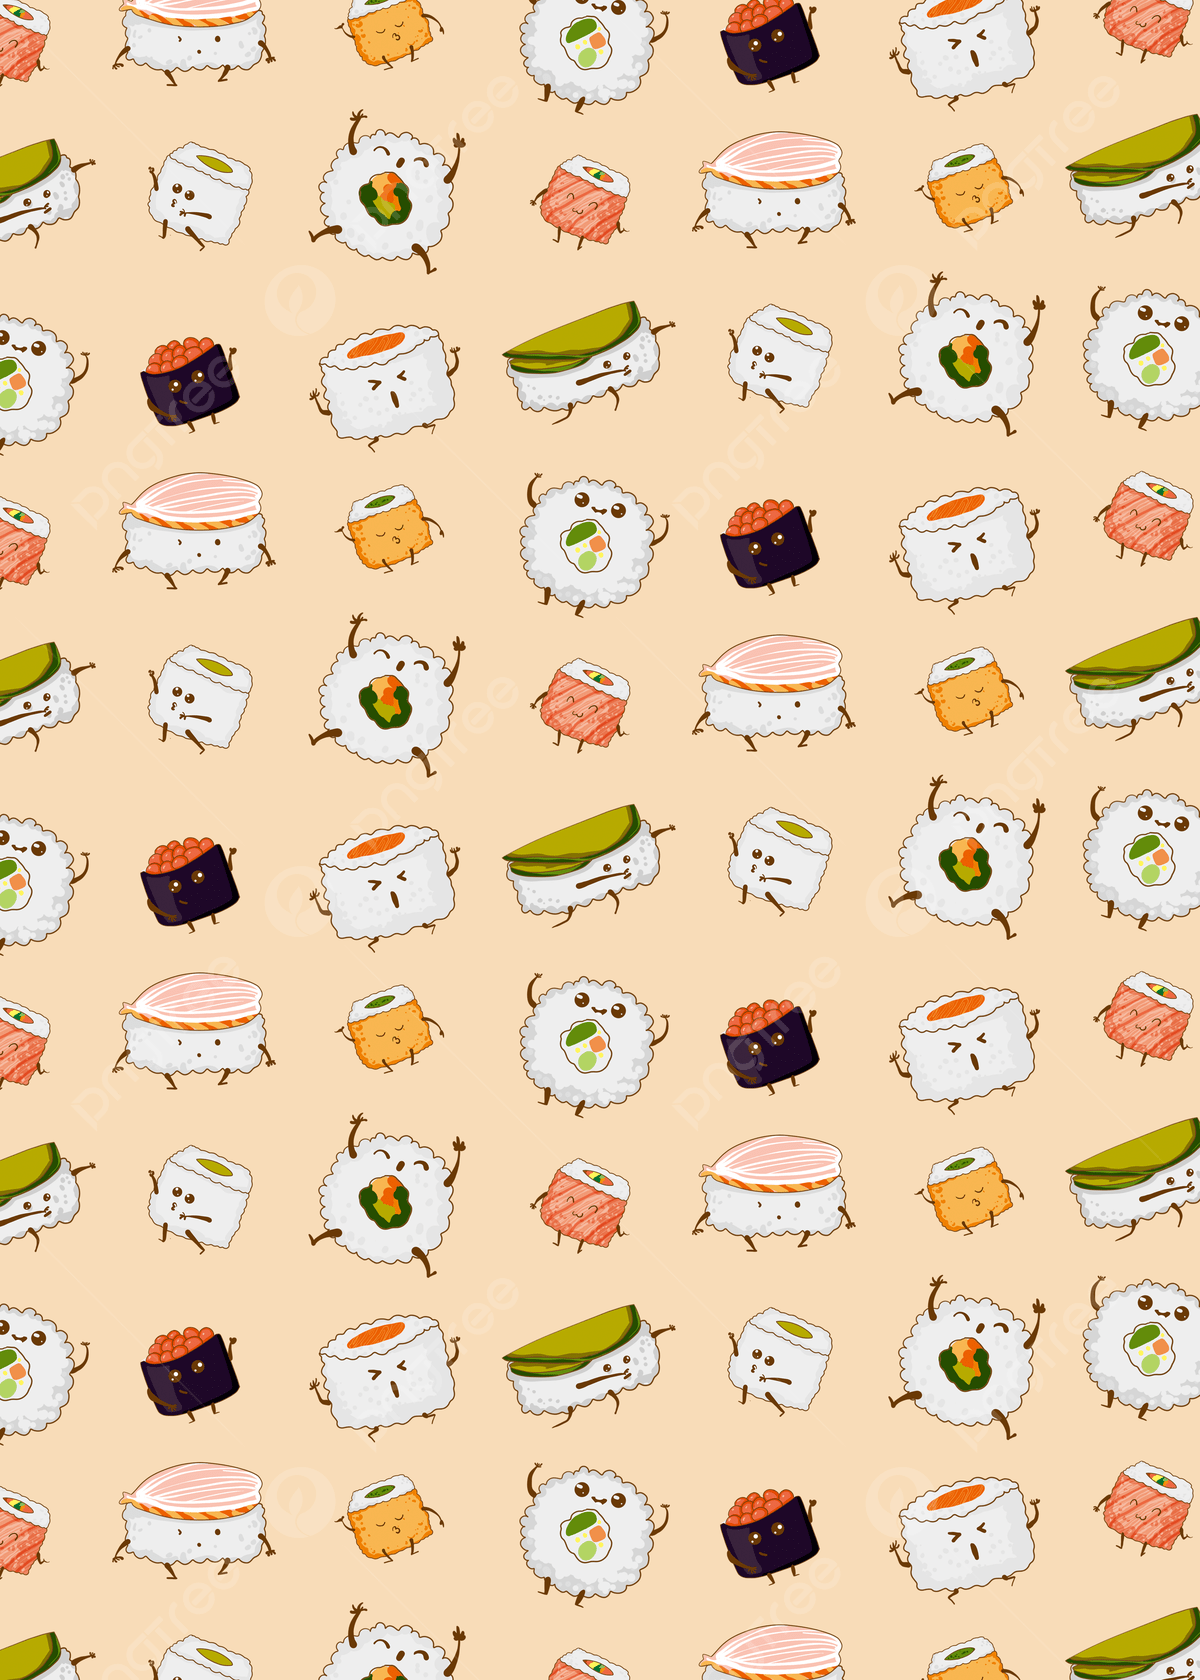 A pattern of sushi characters with various expressions and postures on a beige background. - Sushi